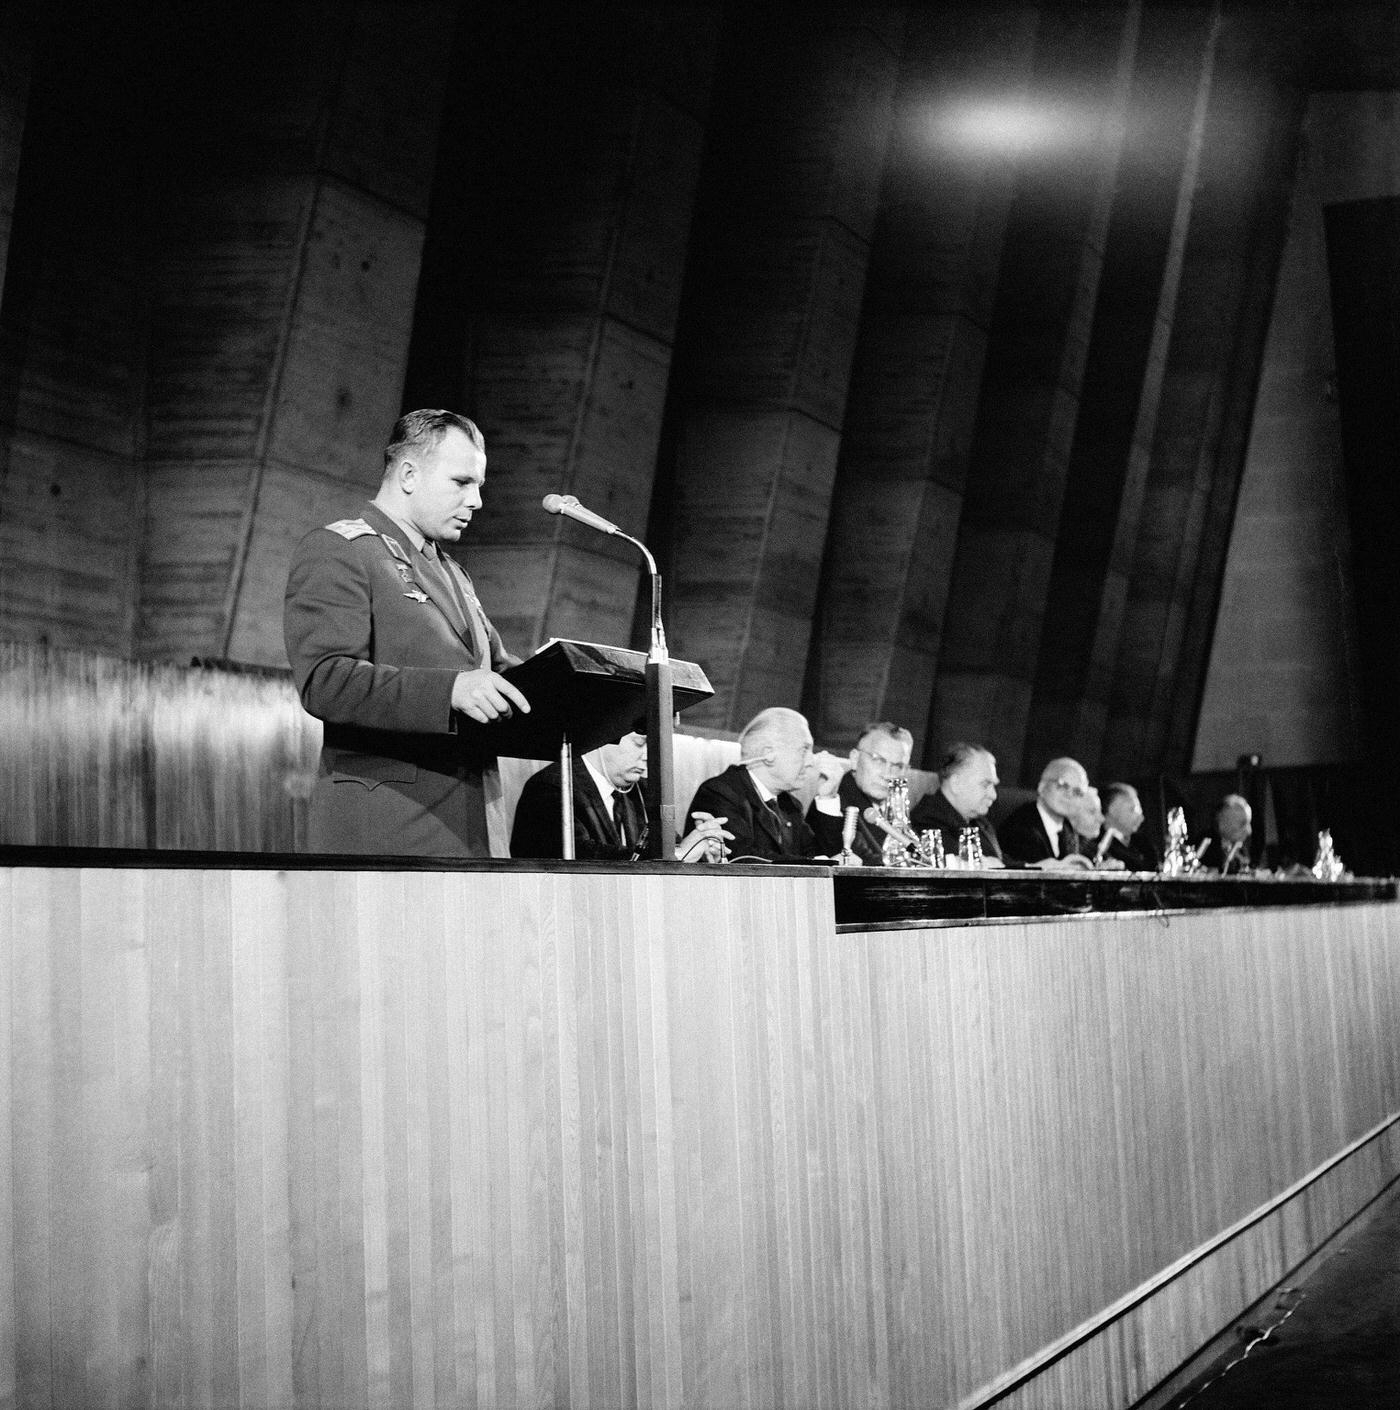 Russian Cosmonaut Yuri Gagarin at the UNESCO Palace during the XIVth Astronautics Conference in Paris, France, 1963